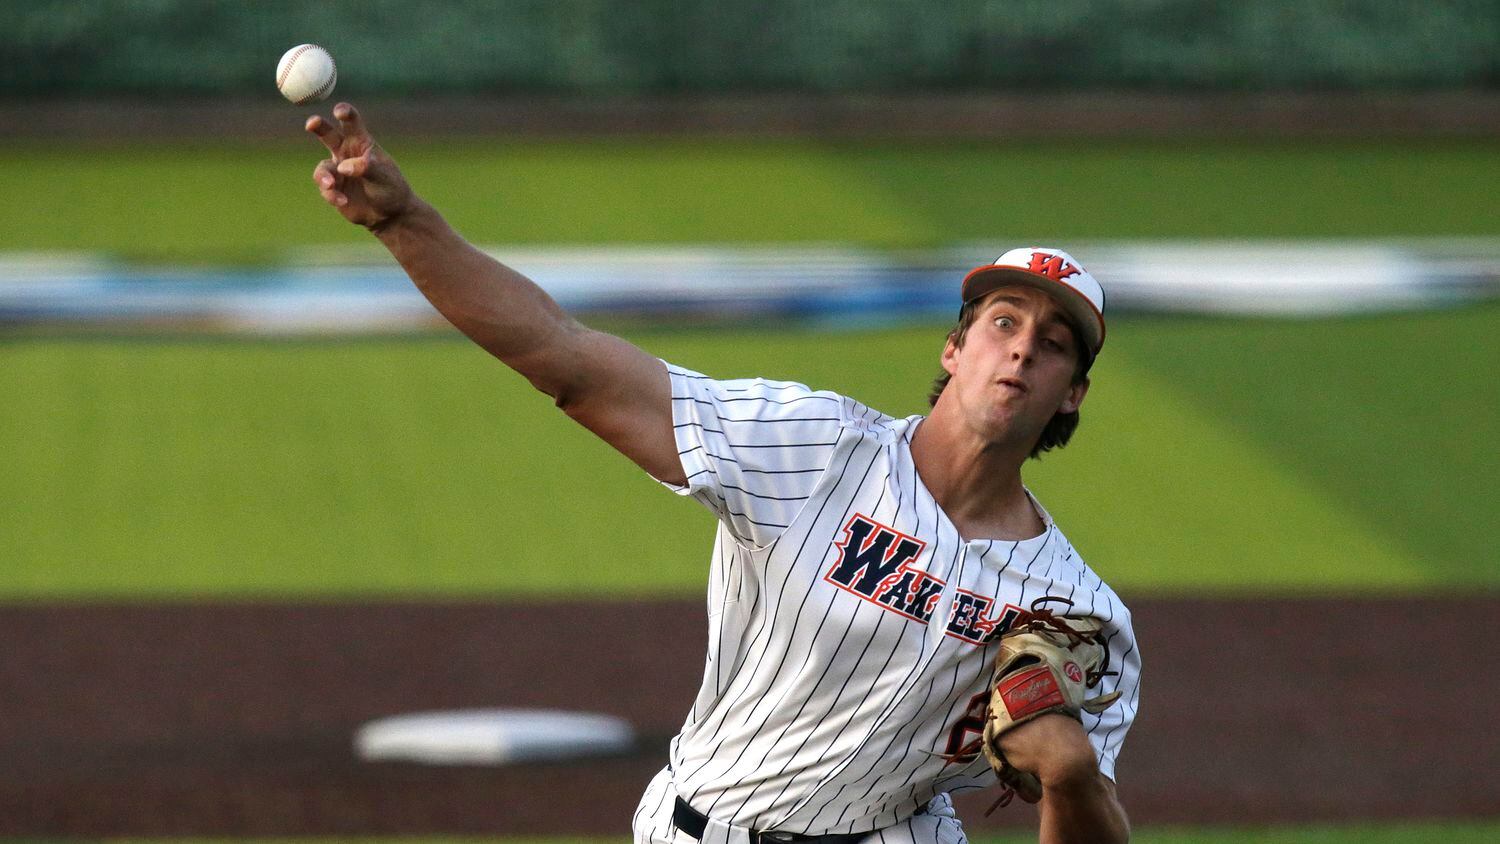 Frisco Wakeland's Carson Priebe delivers a pitch in the first inning during a 10-5 win over...